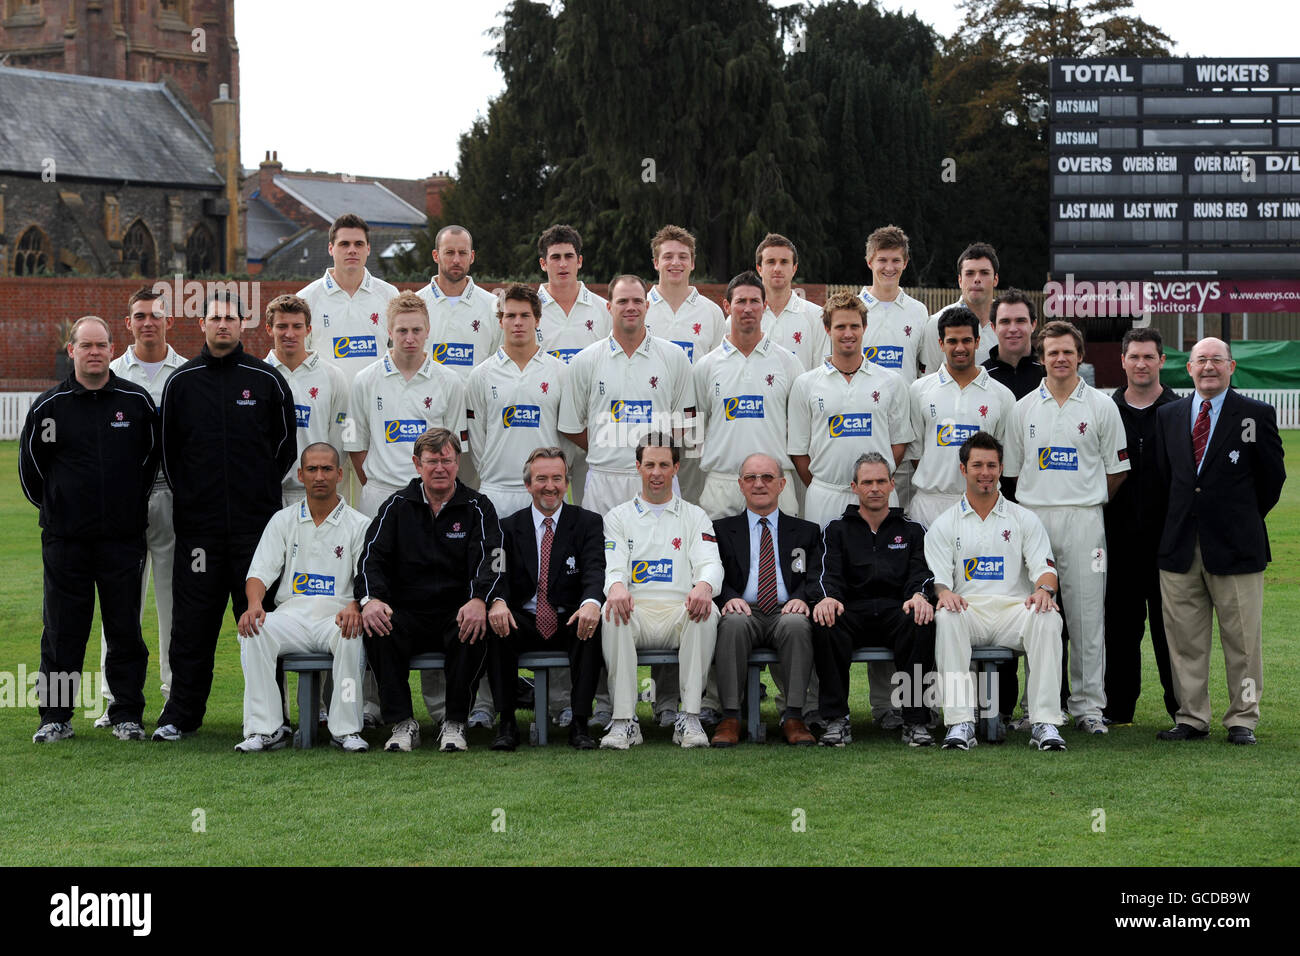 Somerset Team Group: (l-r back row) Robin lett, Charl Whiloughby, Craig Kieswetter, Jos Buttler, Mark Turner, Max Waller and Michael Munday. (middle) Fielding coach pete Sanderson, James Burke, 2nd Xi and Academy manager Jason Kerr, Christopher Jones, James Hayman, Adam Dibble, David Stiff, Ben Phillips, Nick Compton, Arul Suppiah, Physio Ian Brewer, James Hildreth, Stength and Conditioning Coach Darren Veness and Scorer Gerry Stickley. (front) Alfonso Thomas, Director of Cricket Brian Rose, Chairman Andy Nash, Captain Marcus Trescothick, President Roy Kerslake, Head Coach Andy Hurry and Stock Photo